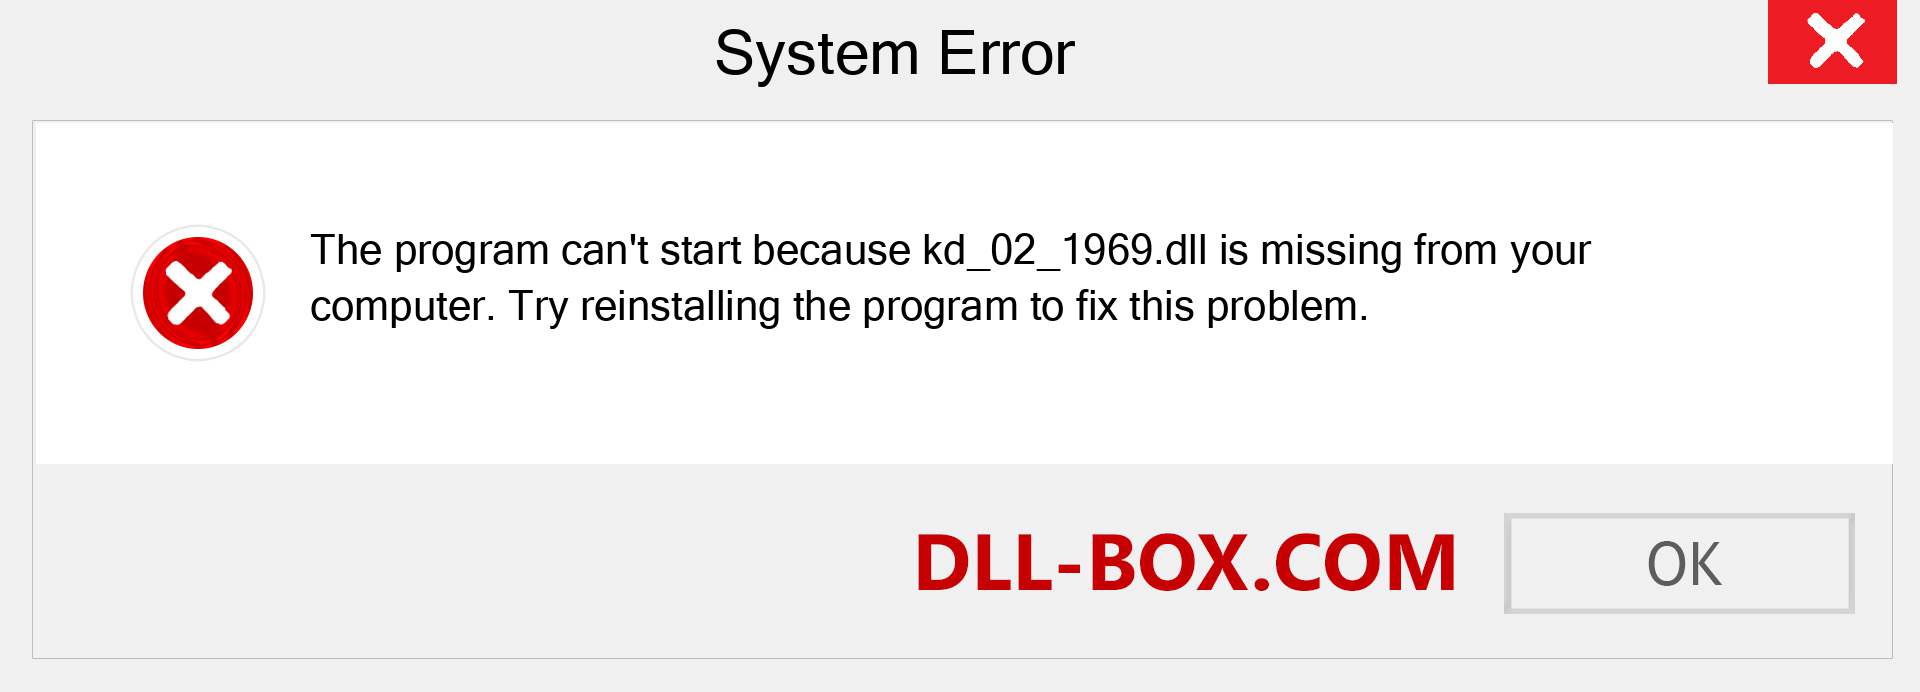  kd_02_1969.dll file is missing?. Download for Windows 7, 8, 10 - Fix  kd_02_1969 dll Missing Error on Windows, photos, images